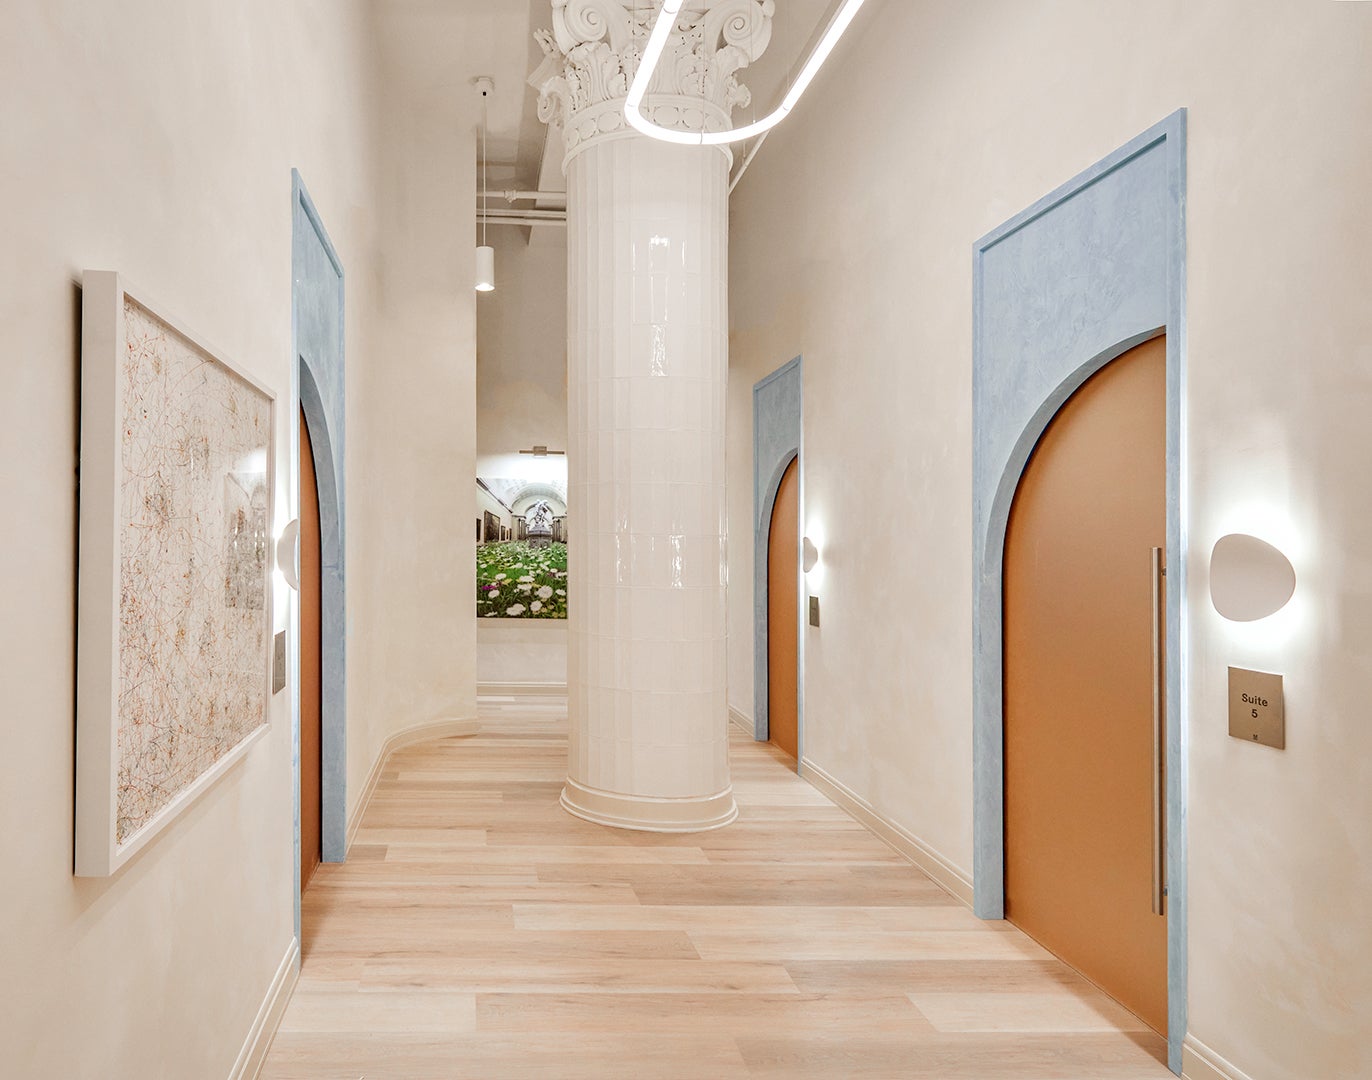 Plaster Walls Don’t Have to Be Beige—Just Check Out This Wellness Studio